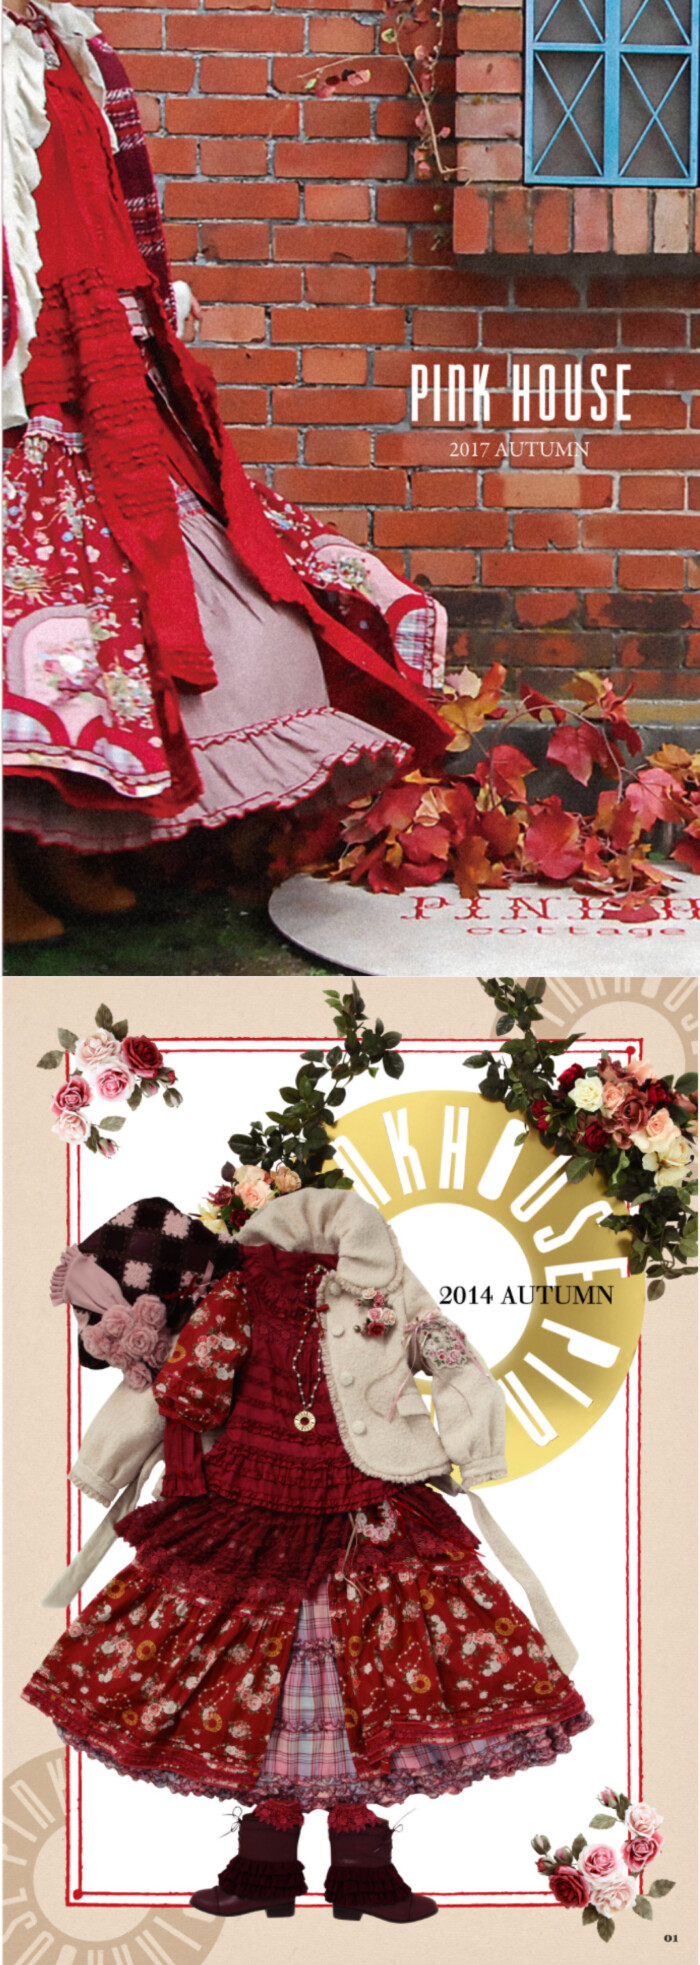 pinkhouse 2014-2019 collection books.